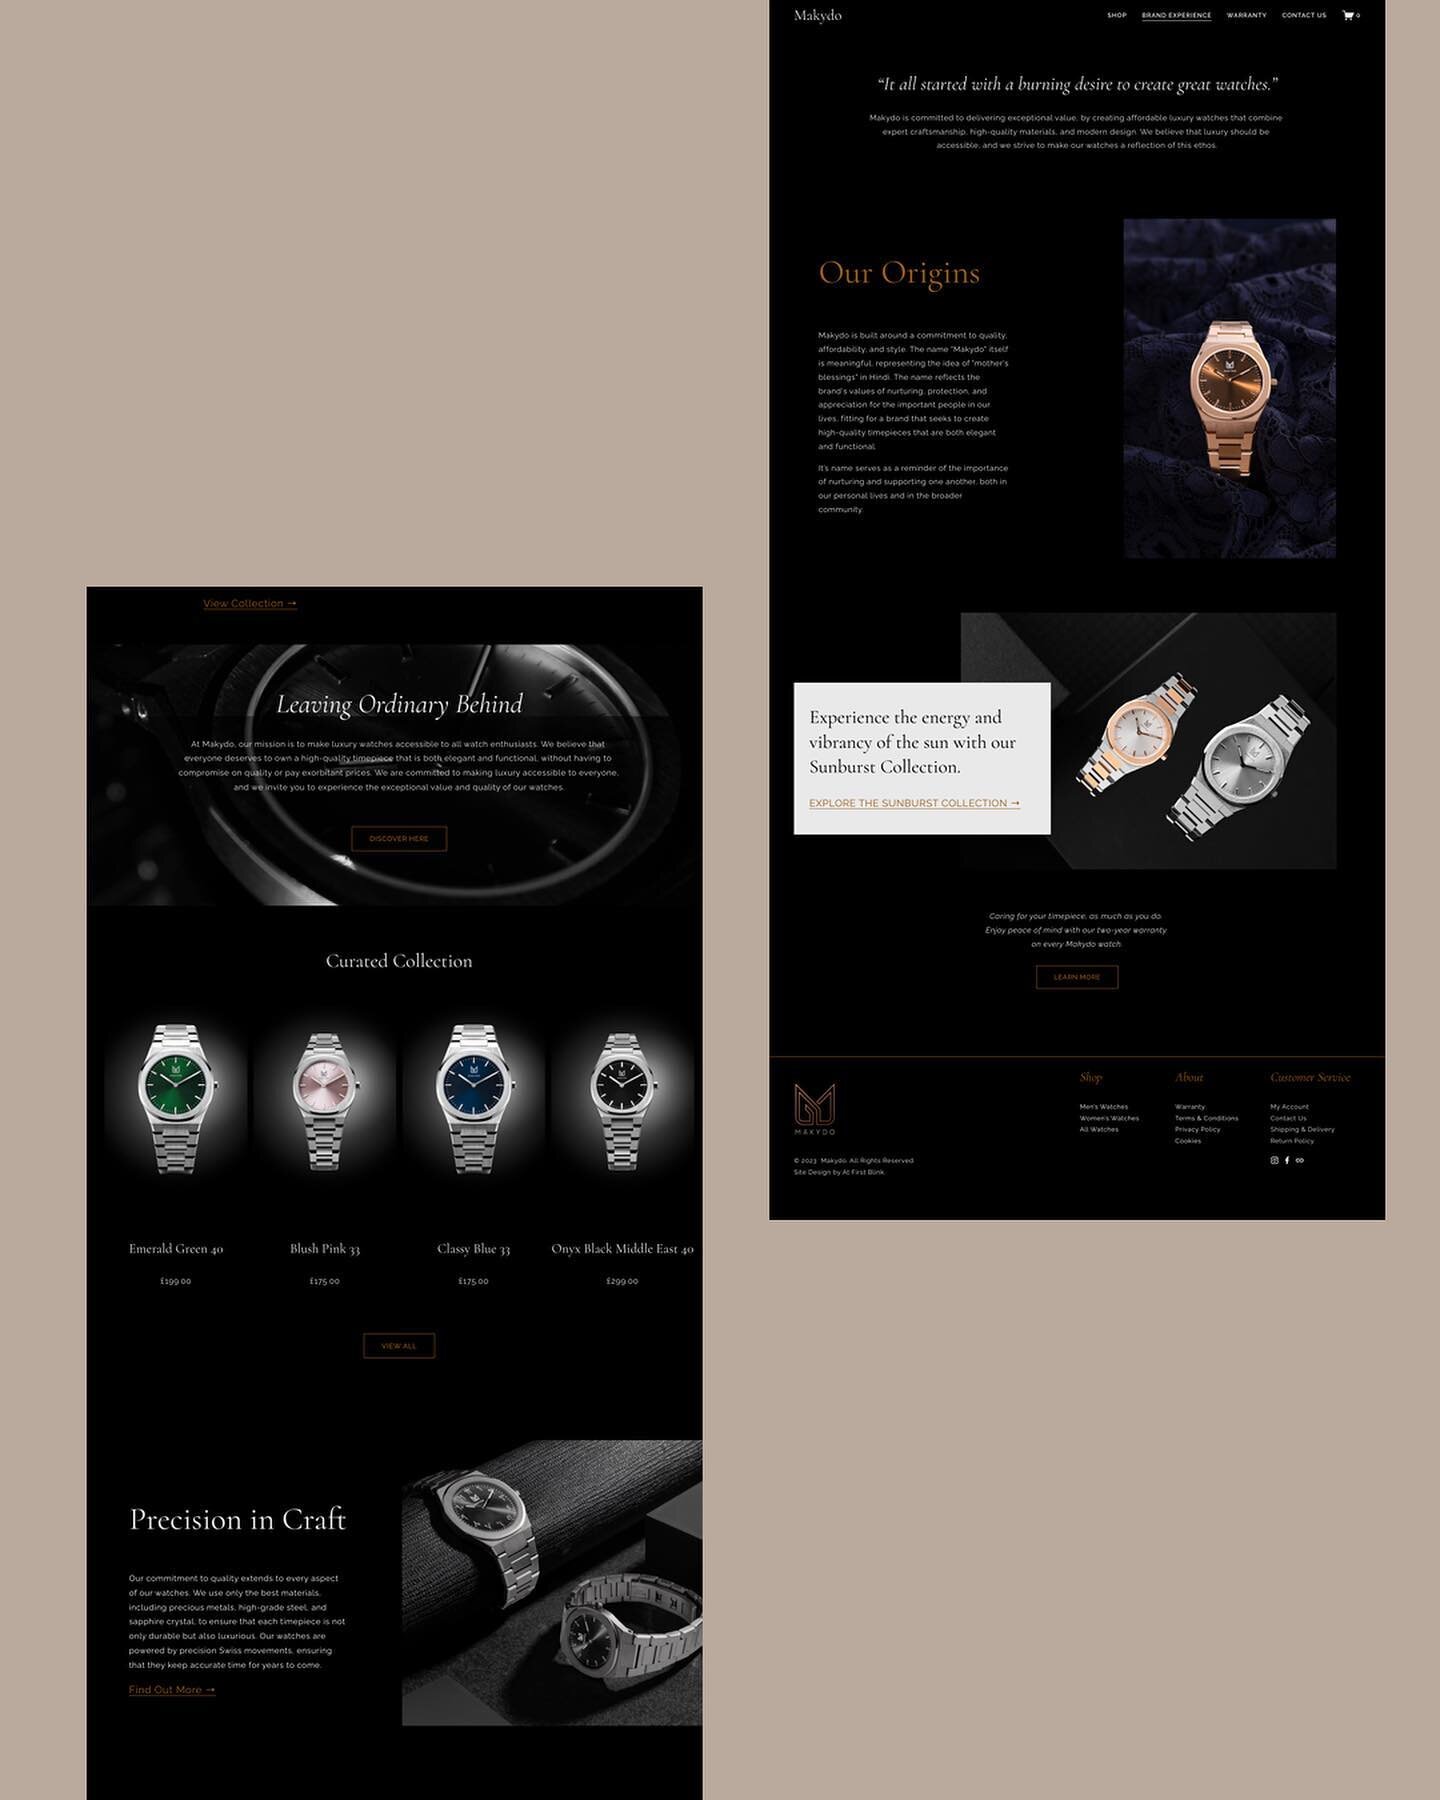 Our latest web design project allowed us to explore designing a captivatingly dark, scroll stopping website with ultra modern details. 

We love working with passionate, creative entrepreneurs looking at elevating their brand experience. Are you one 